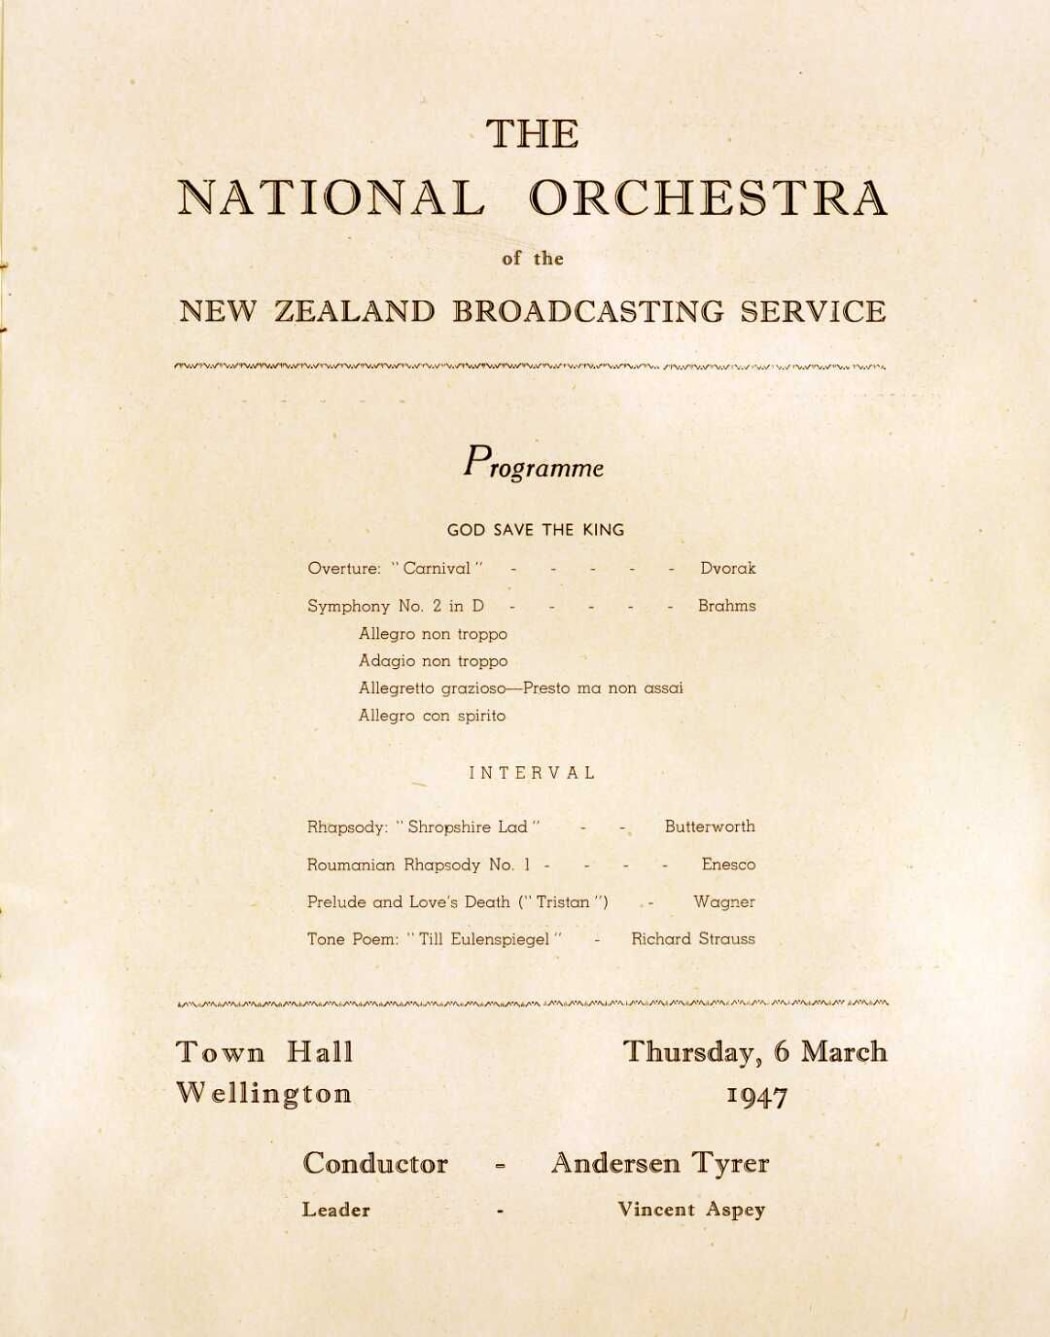 Souvenir programme from the first ever public concert given by the National Orchestra on 6 March 1947.